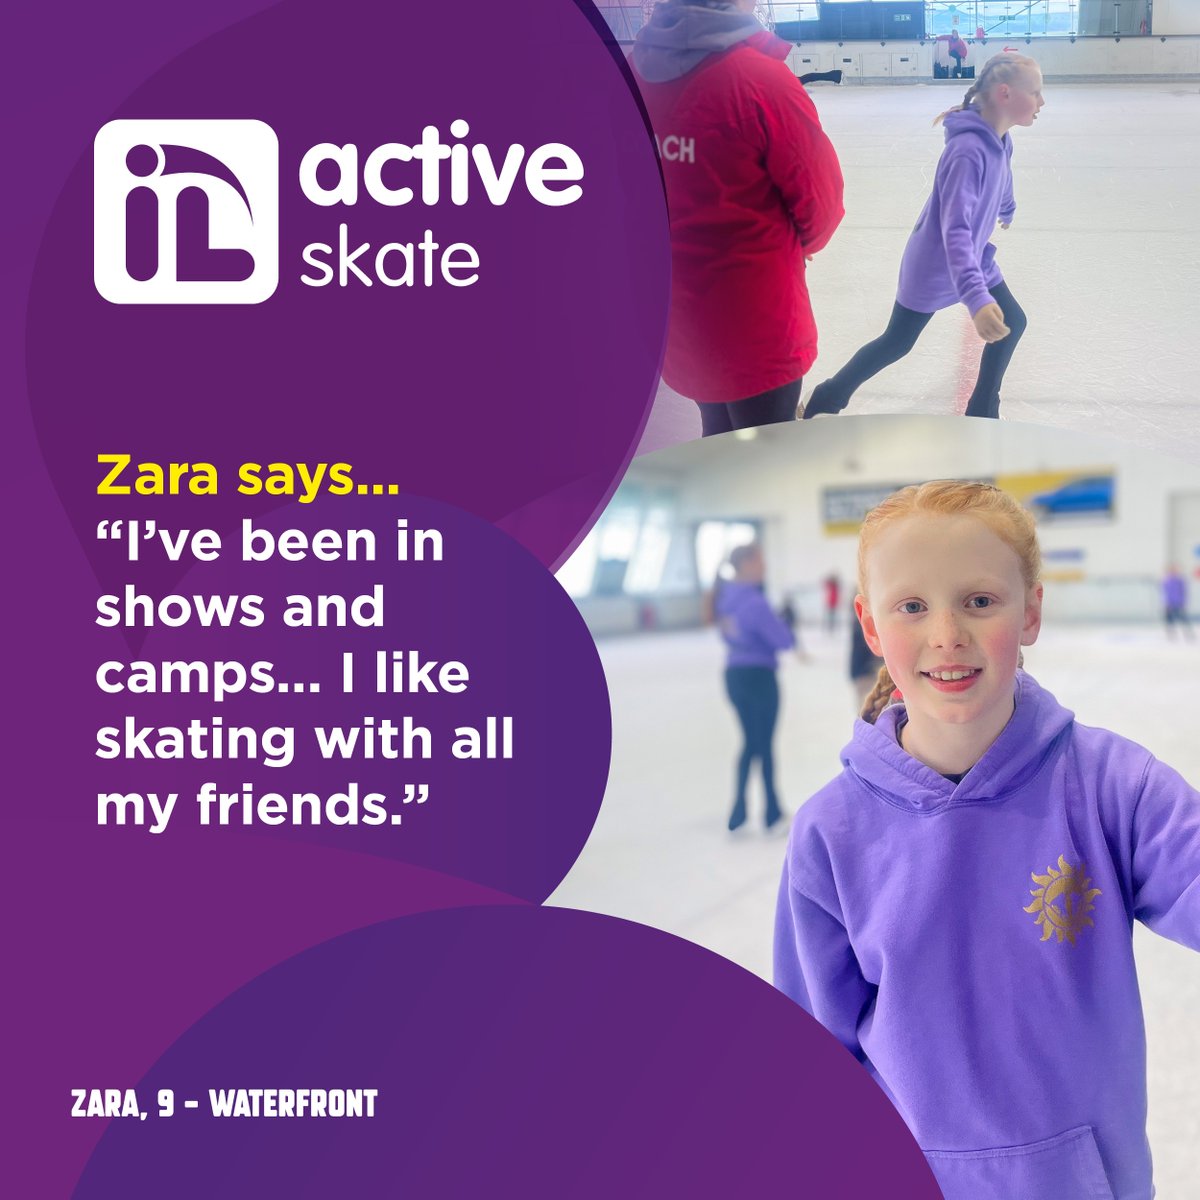 Inverclyde Leisure are committed to getting members of our community active from a young age 🙌 Zara loves skating with her friends to keep active! Find out more👇 inverclydeleisure.com/theirjourney